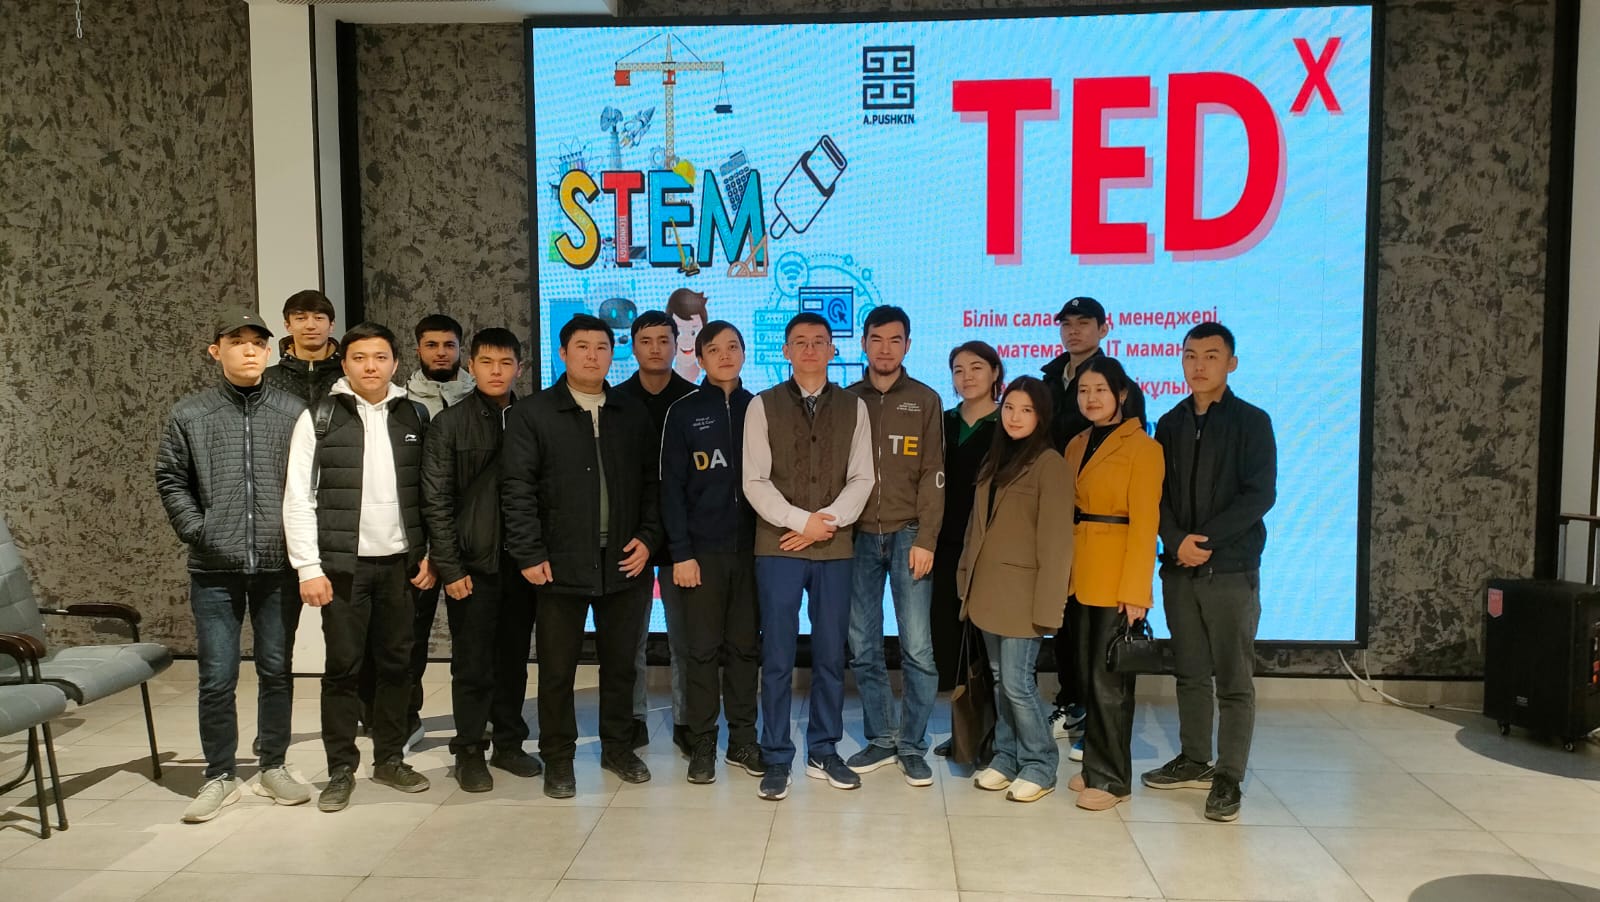 TEDx “STEM education. The importance of IoT technologies in the field of education”